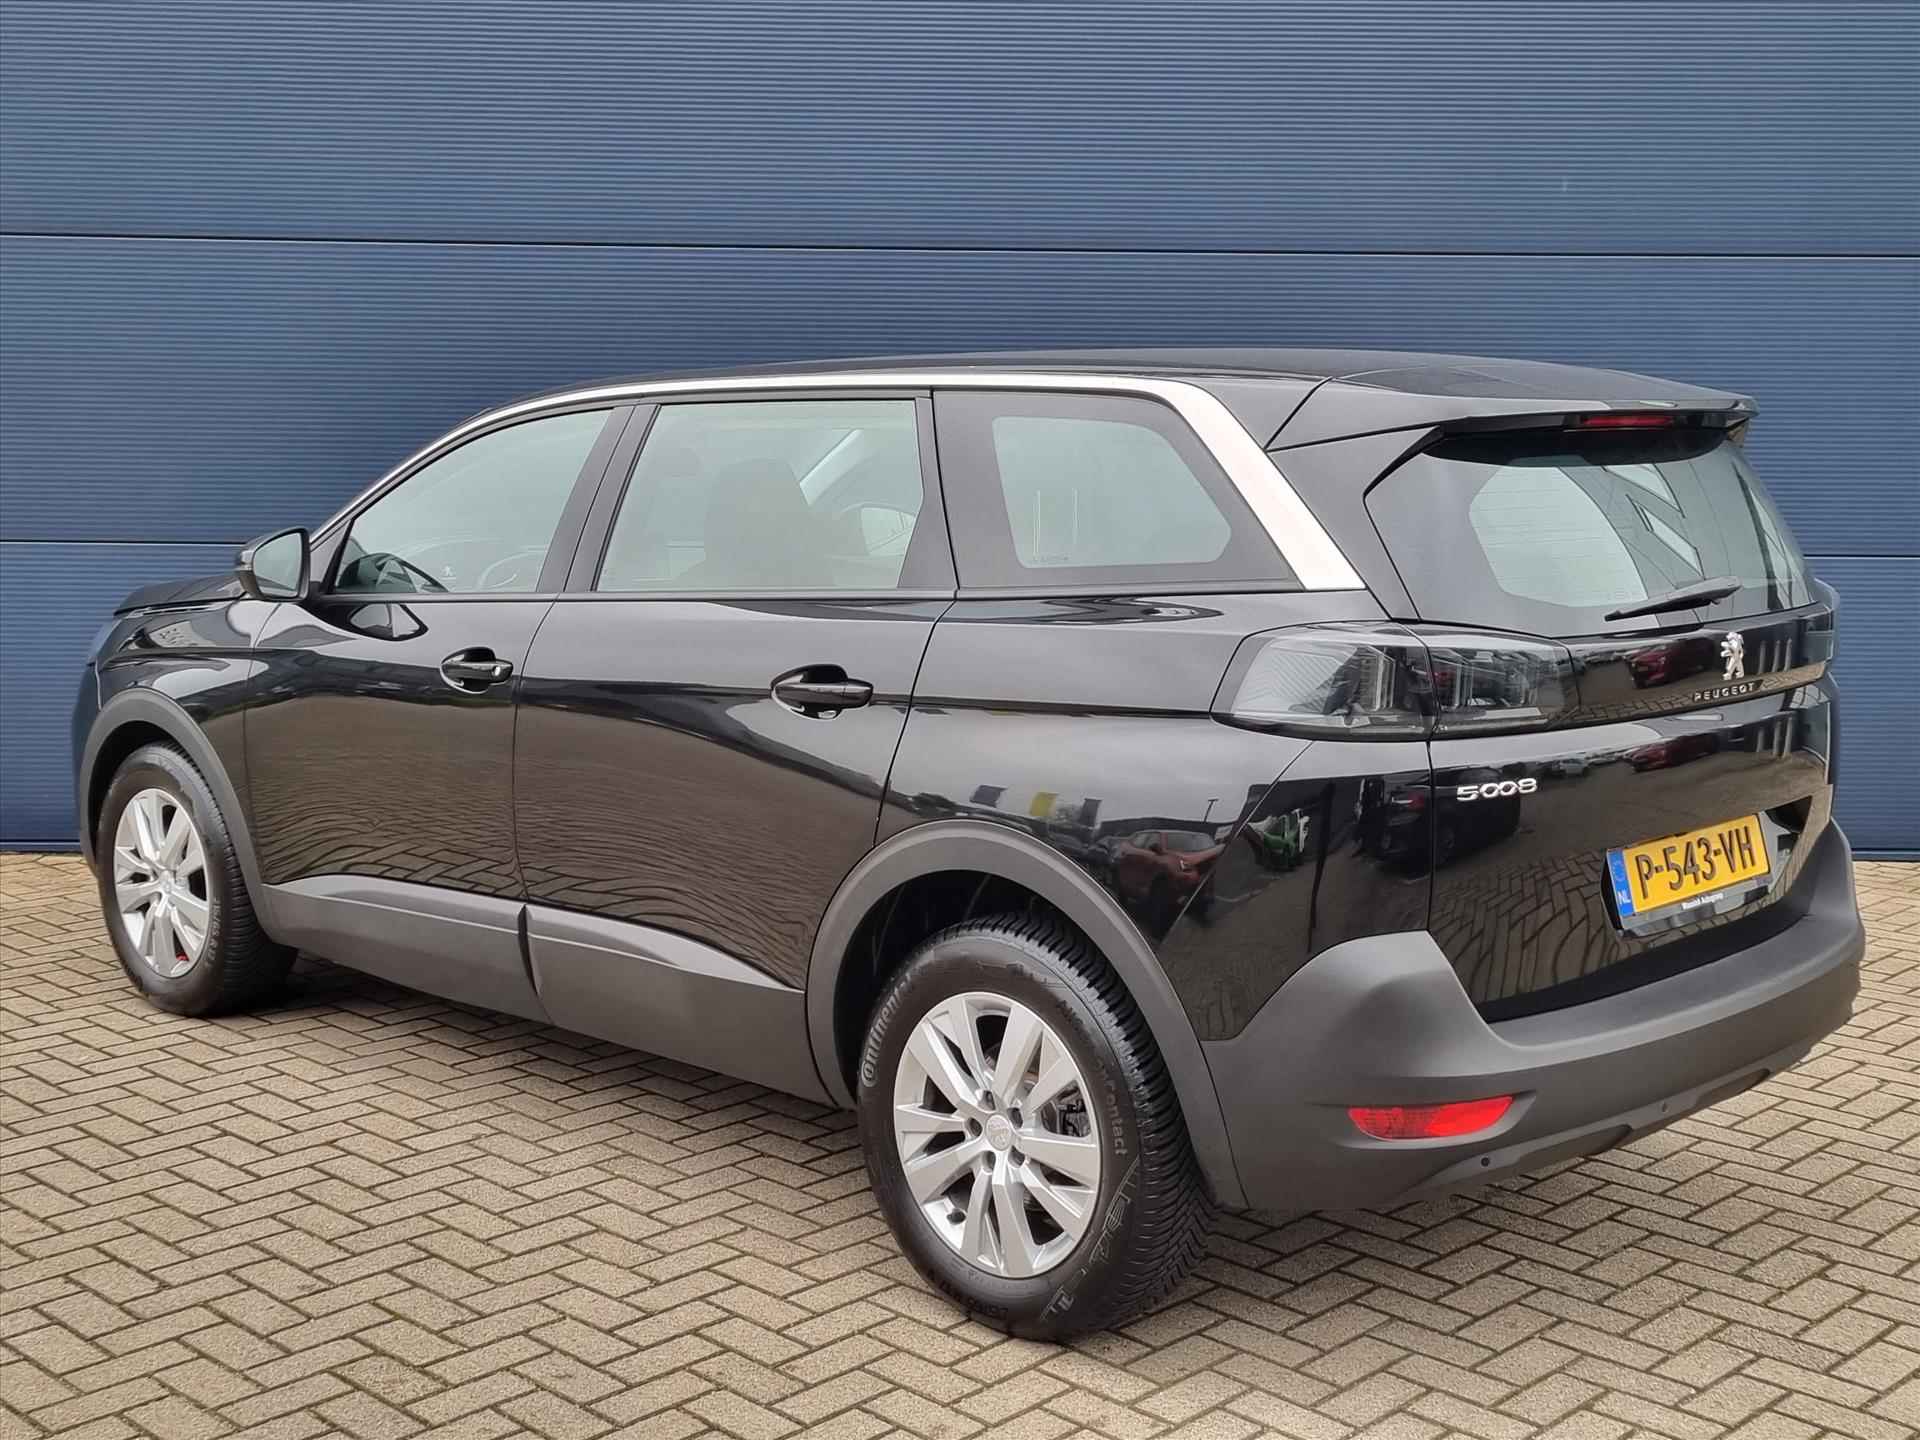 PEUGEOT 5008 1.2 Turbo 130pk Active Pack Business Automaat | Navigatie | Camera | All Season Banden | 7-Persoons | Climate Control | Parkeersensoren V+A | - 3/46